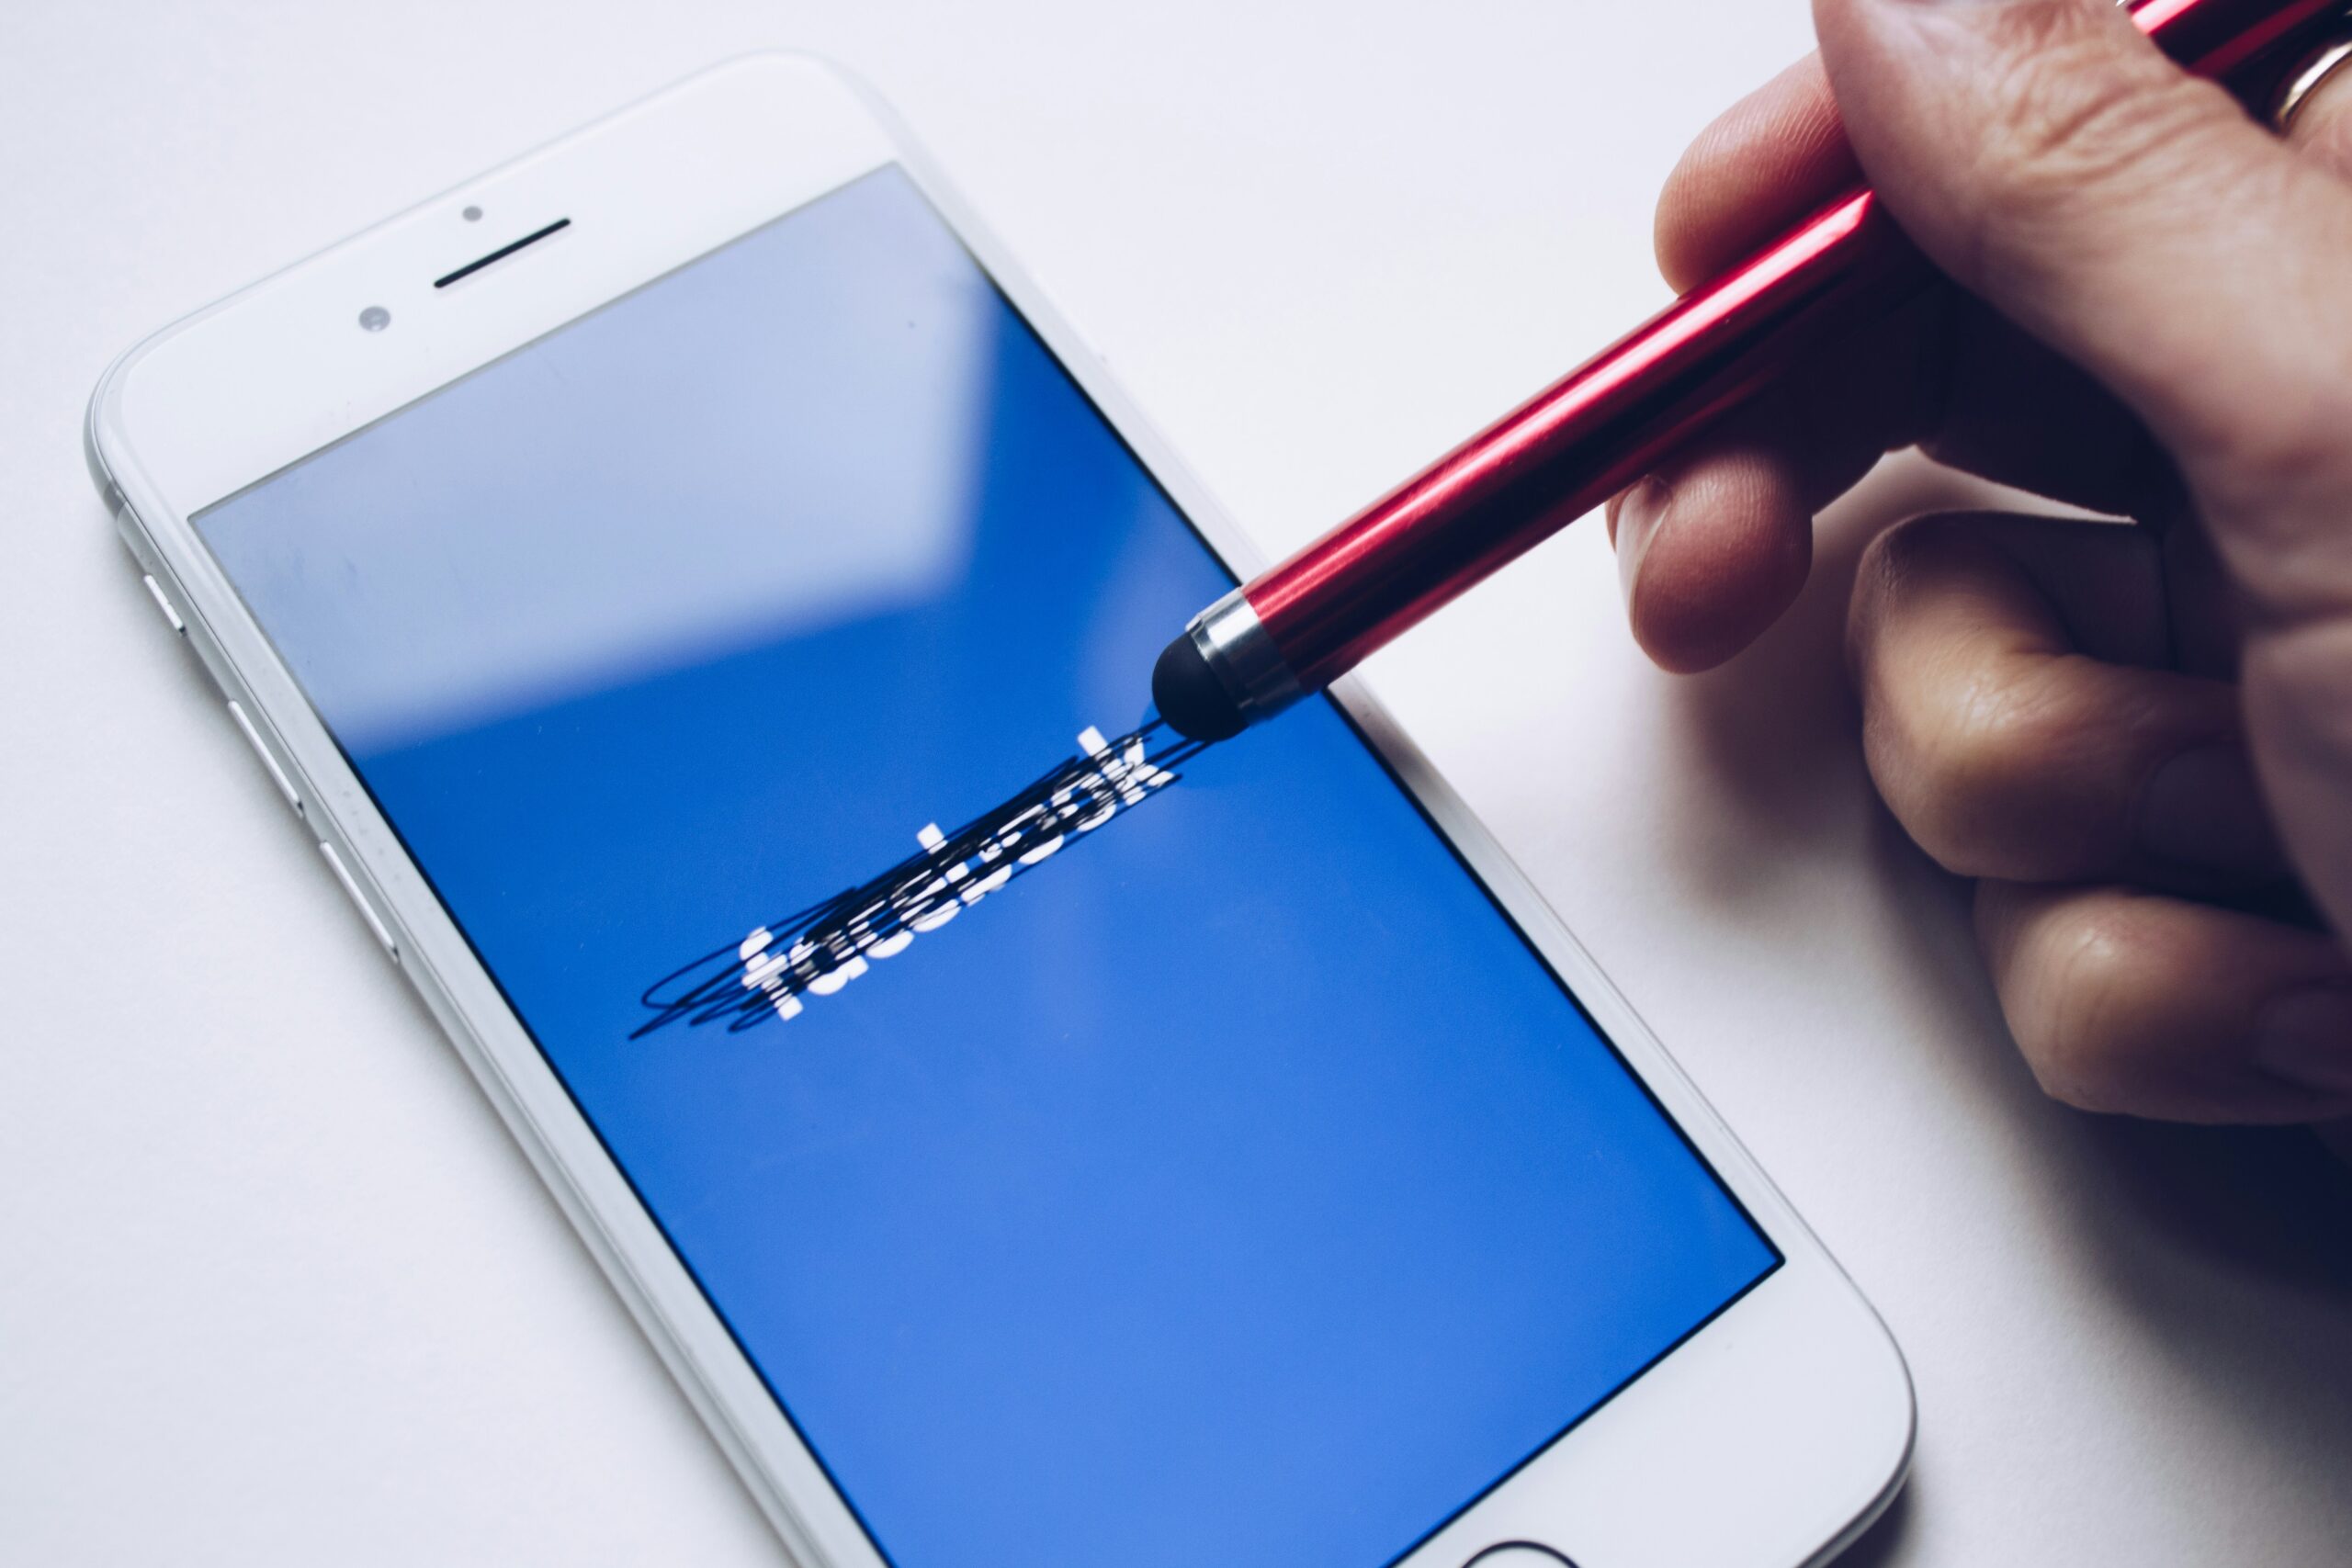 A stylus held by a hand hovering over a smartphone with the Facebook logo scribbled out on it